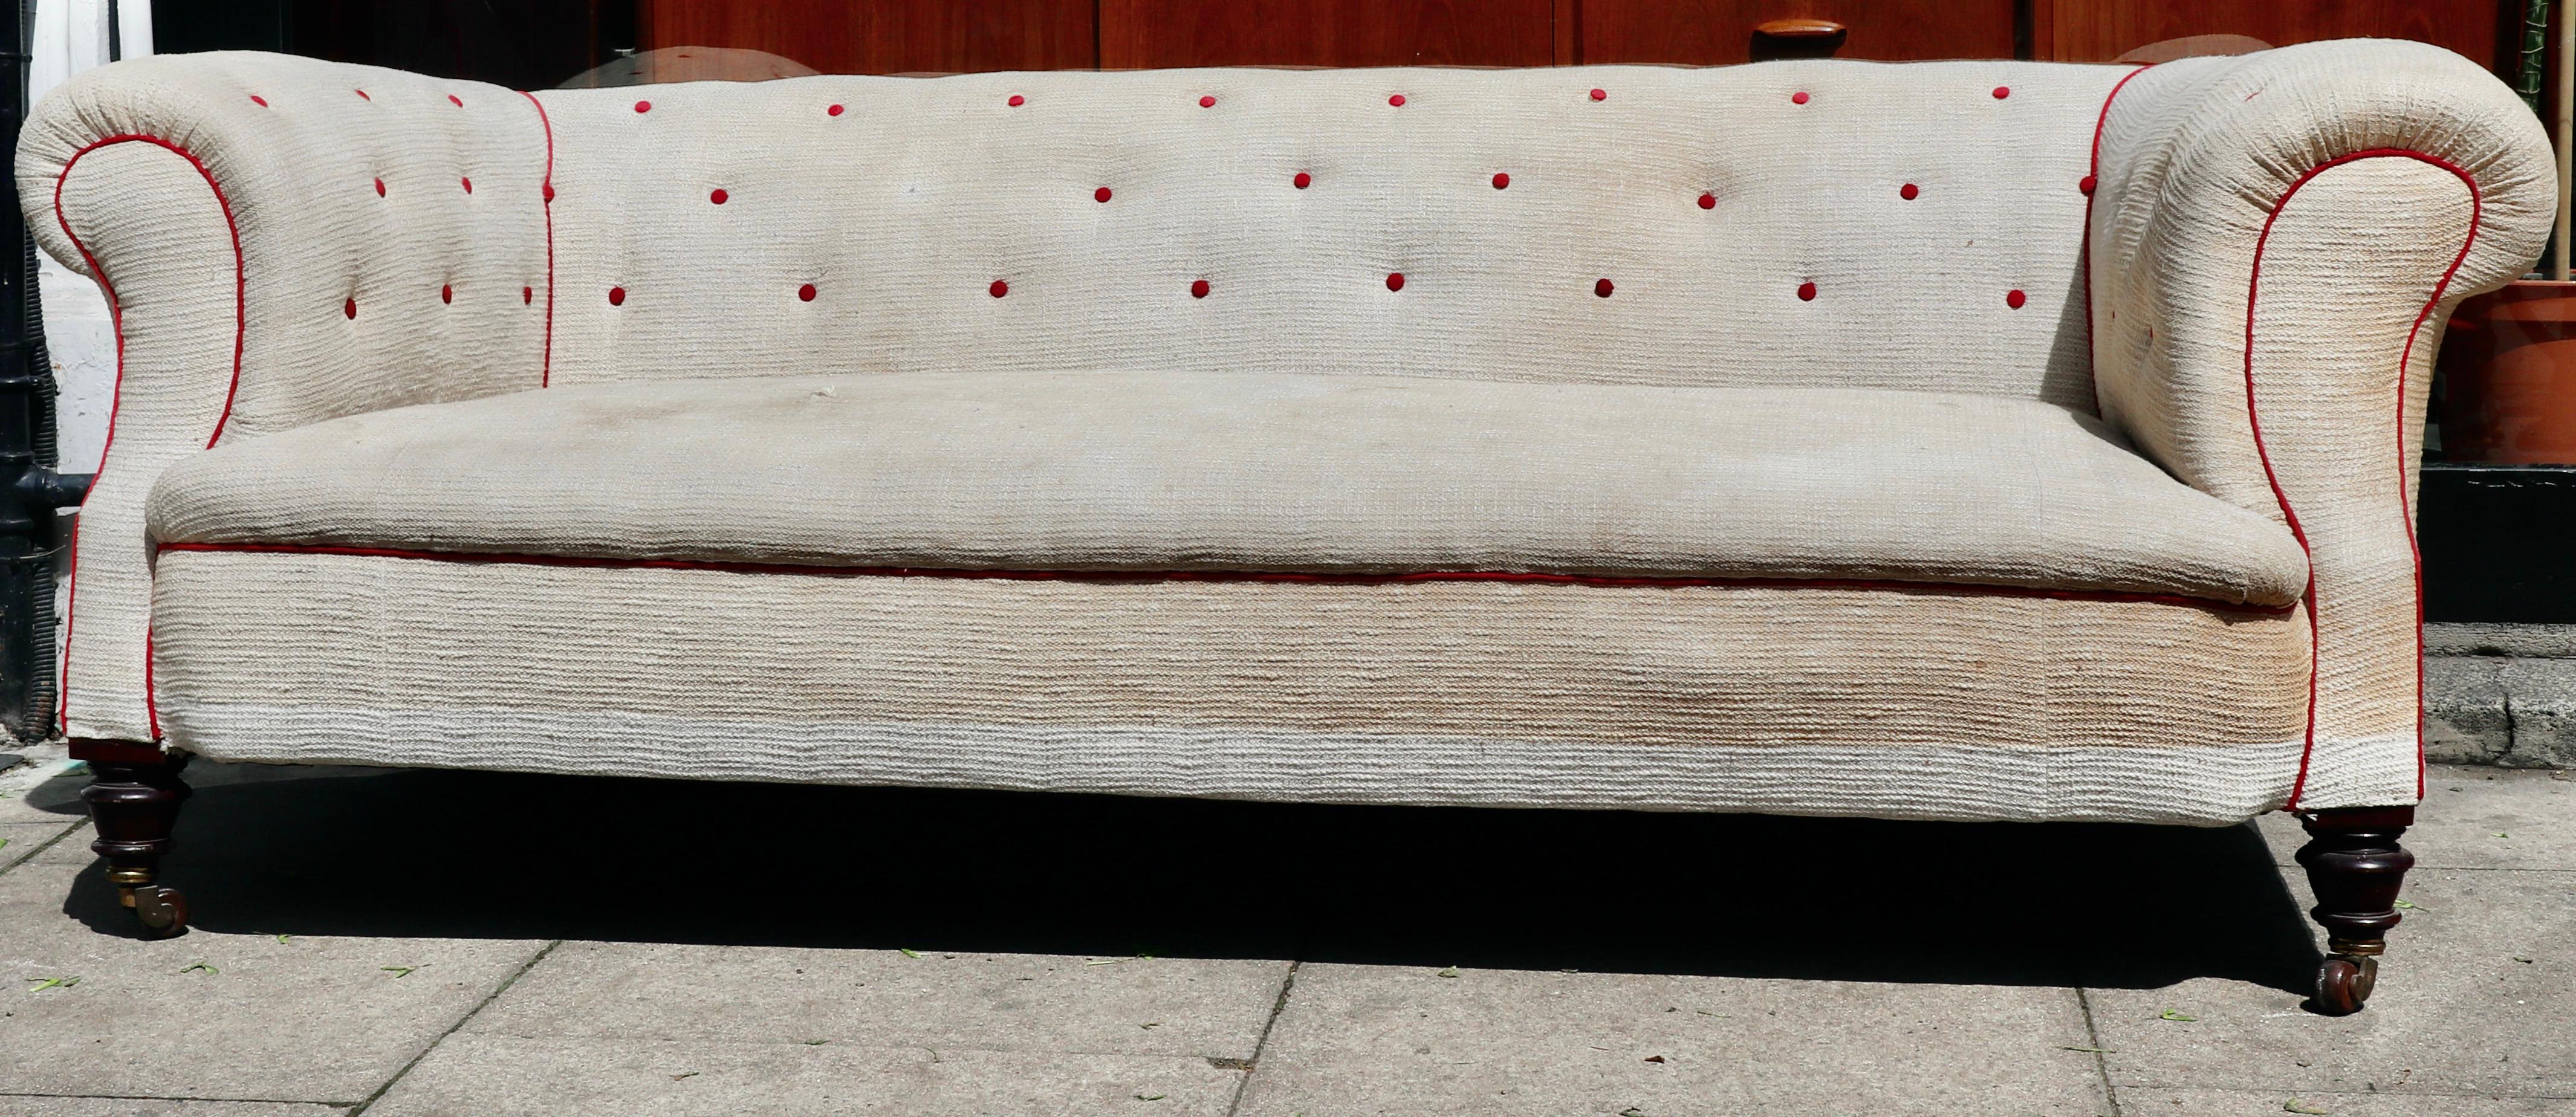 Victorian LARGE VICTORIAN ENGLISH CHESTERFIELD SOFA c1890 For Sale